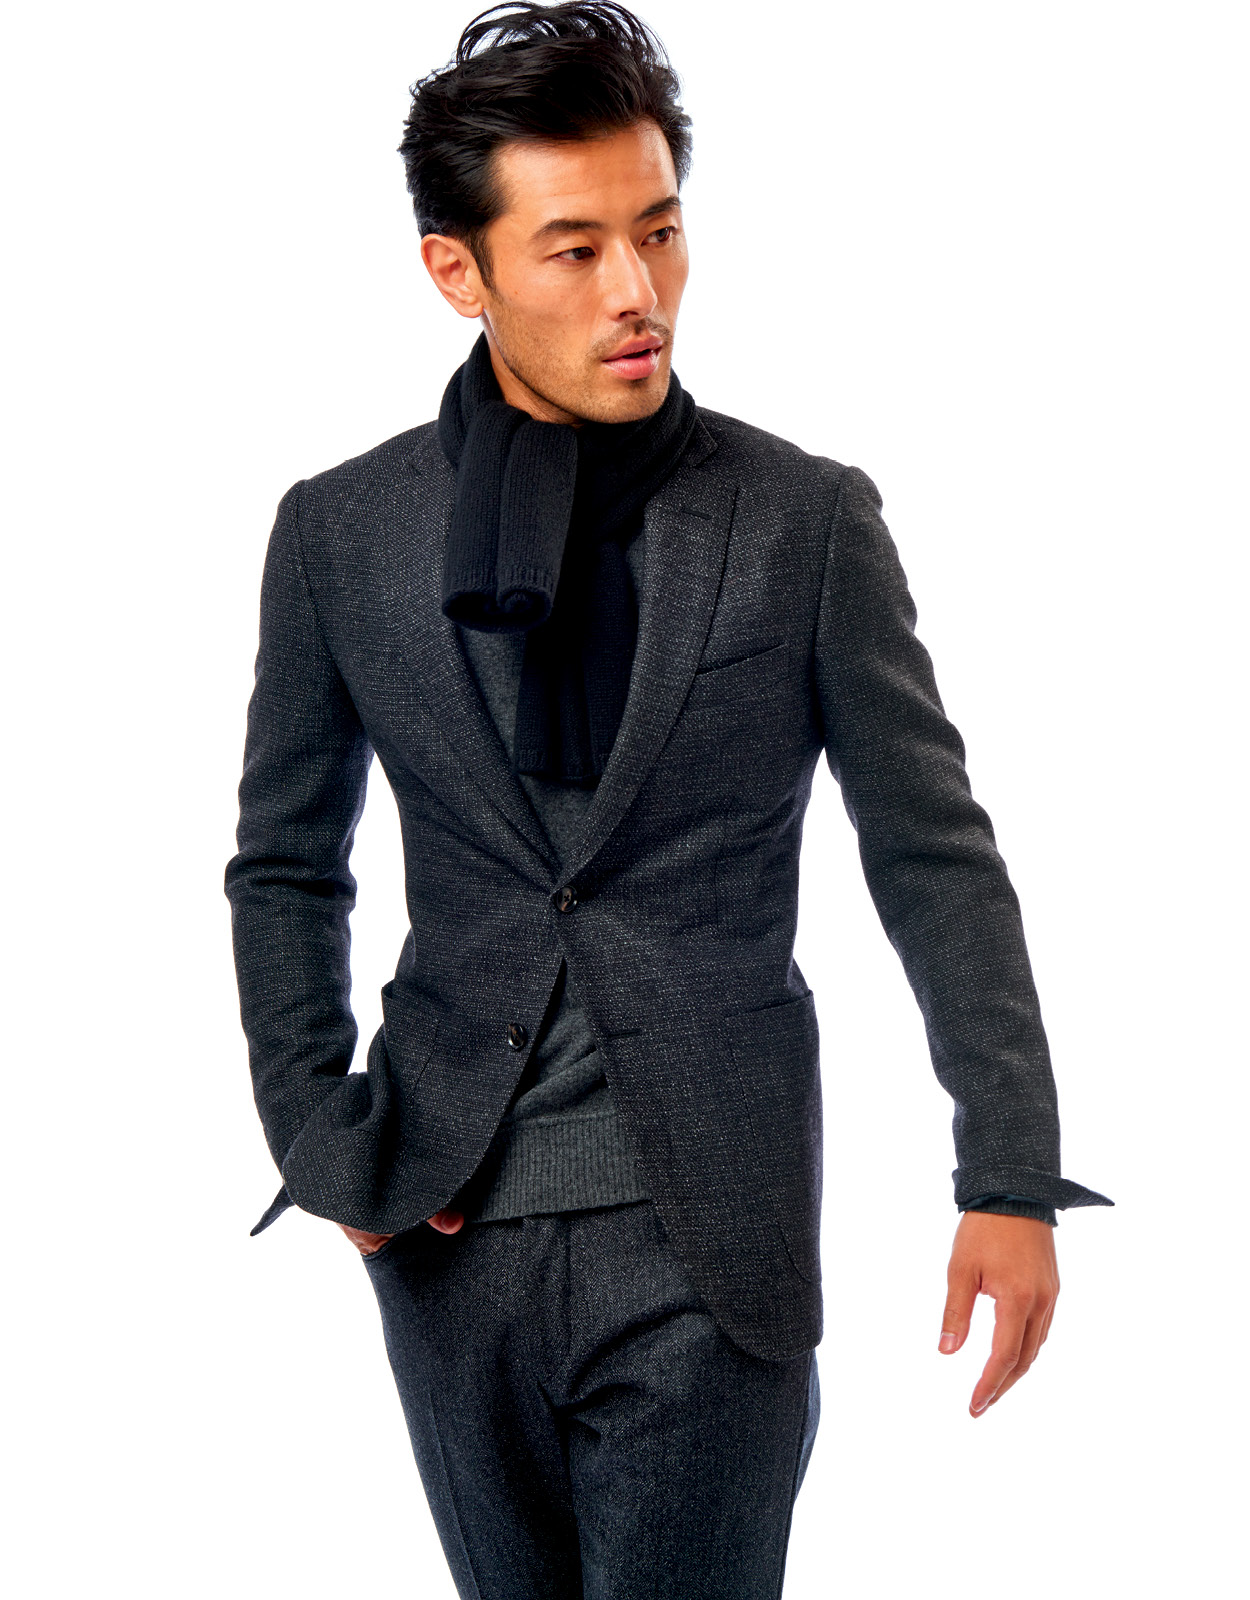 Suit Yourself: The 4 Statement Suits You Need This Winter - Sharp Magazine